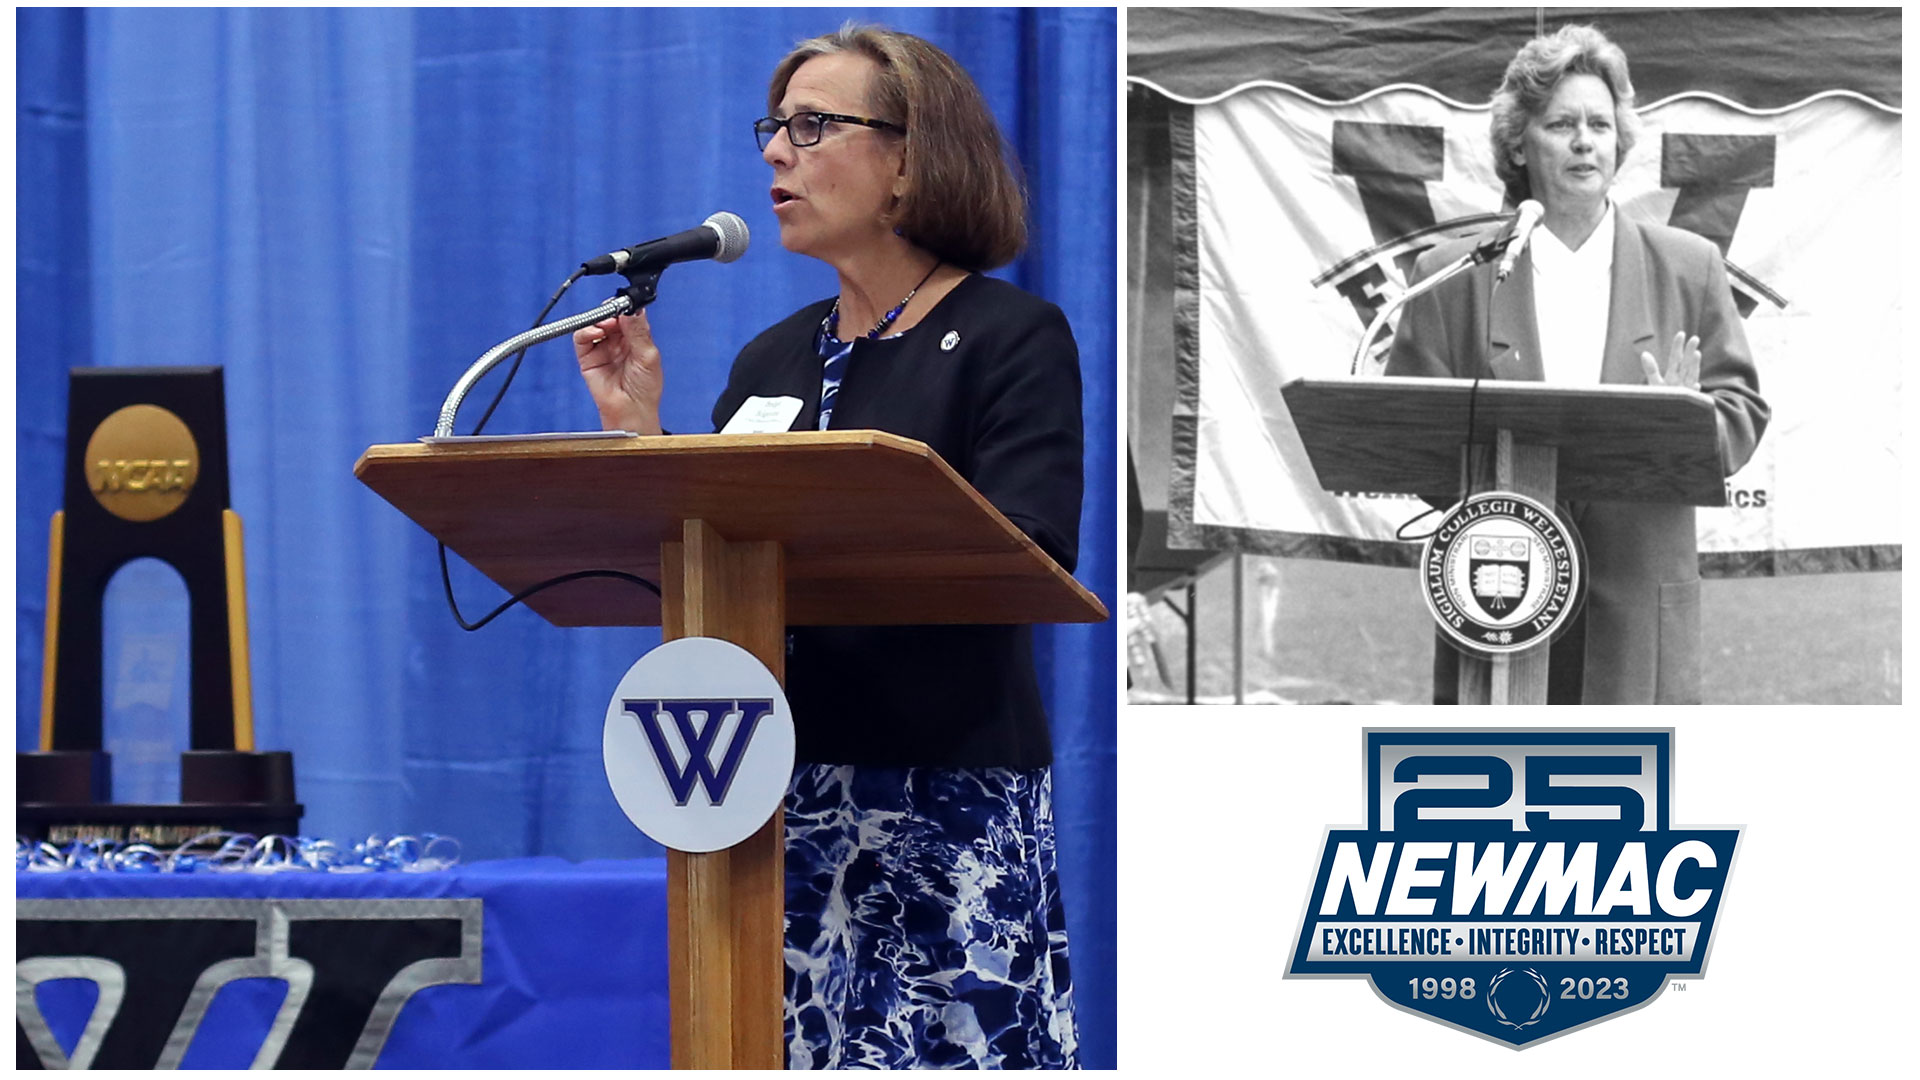 Former Wellesley College Directors of Athletics, Louise O'Neal (right) and Bridget Belgiovine (left) have been recognized as NEWMAC Champions of Excellence Service Award recipients.